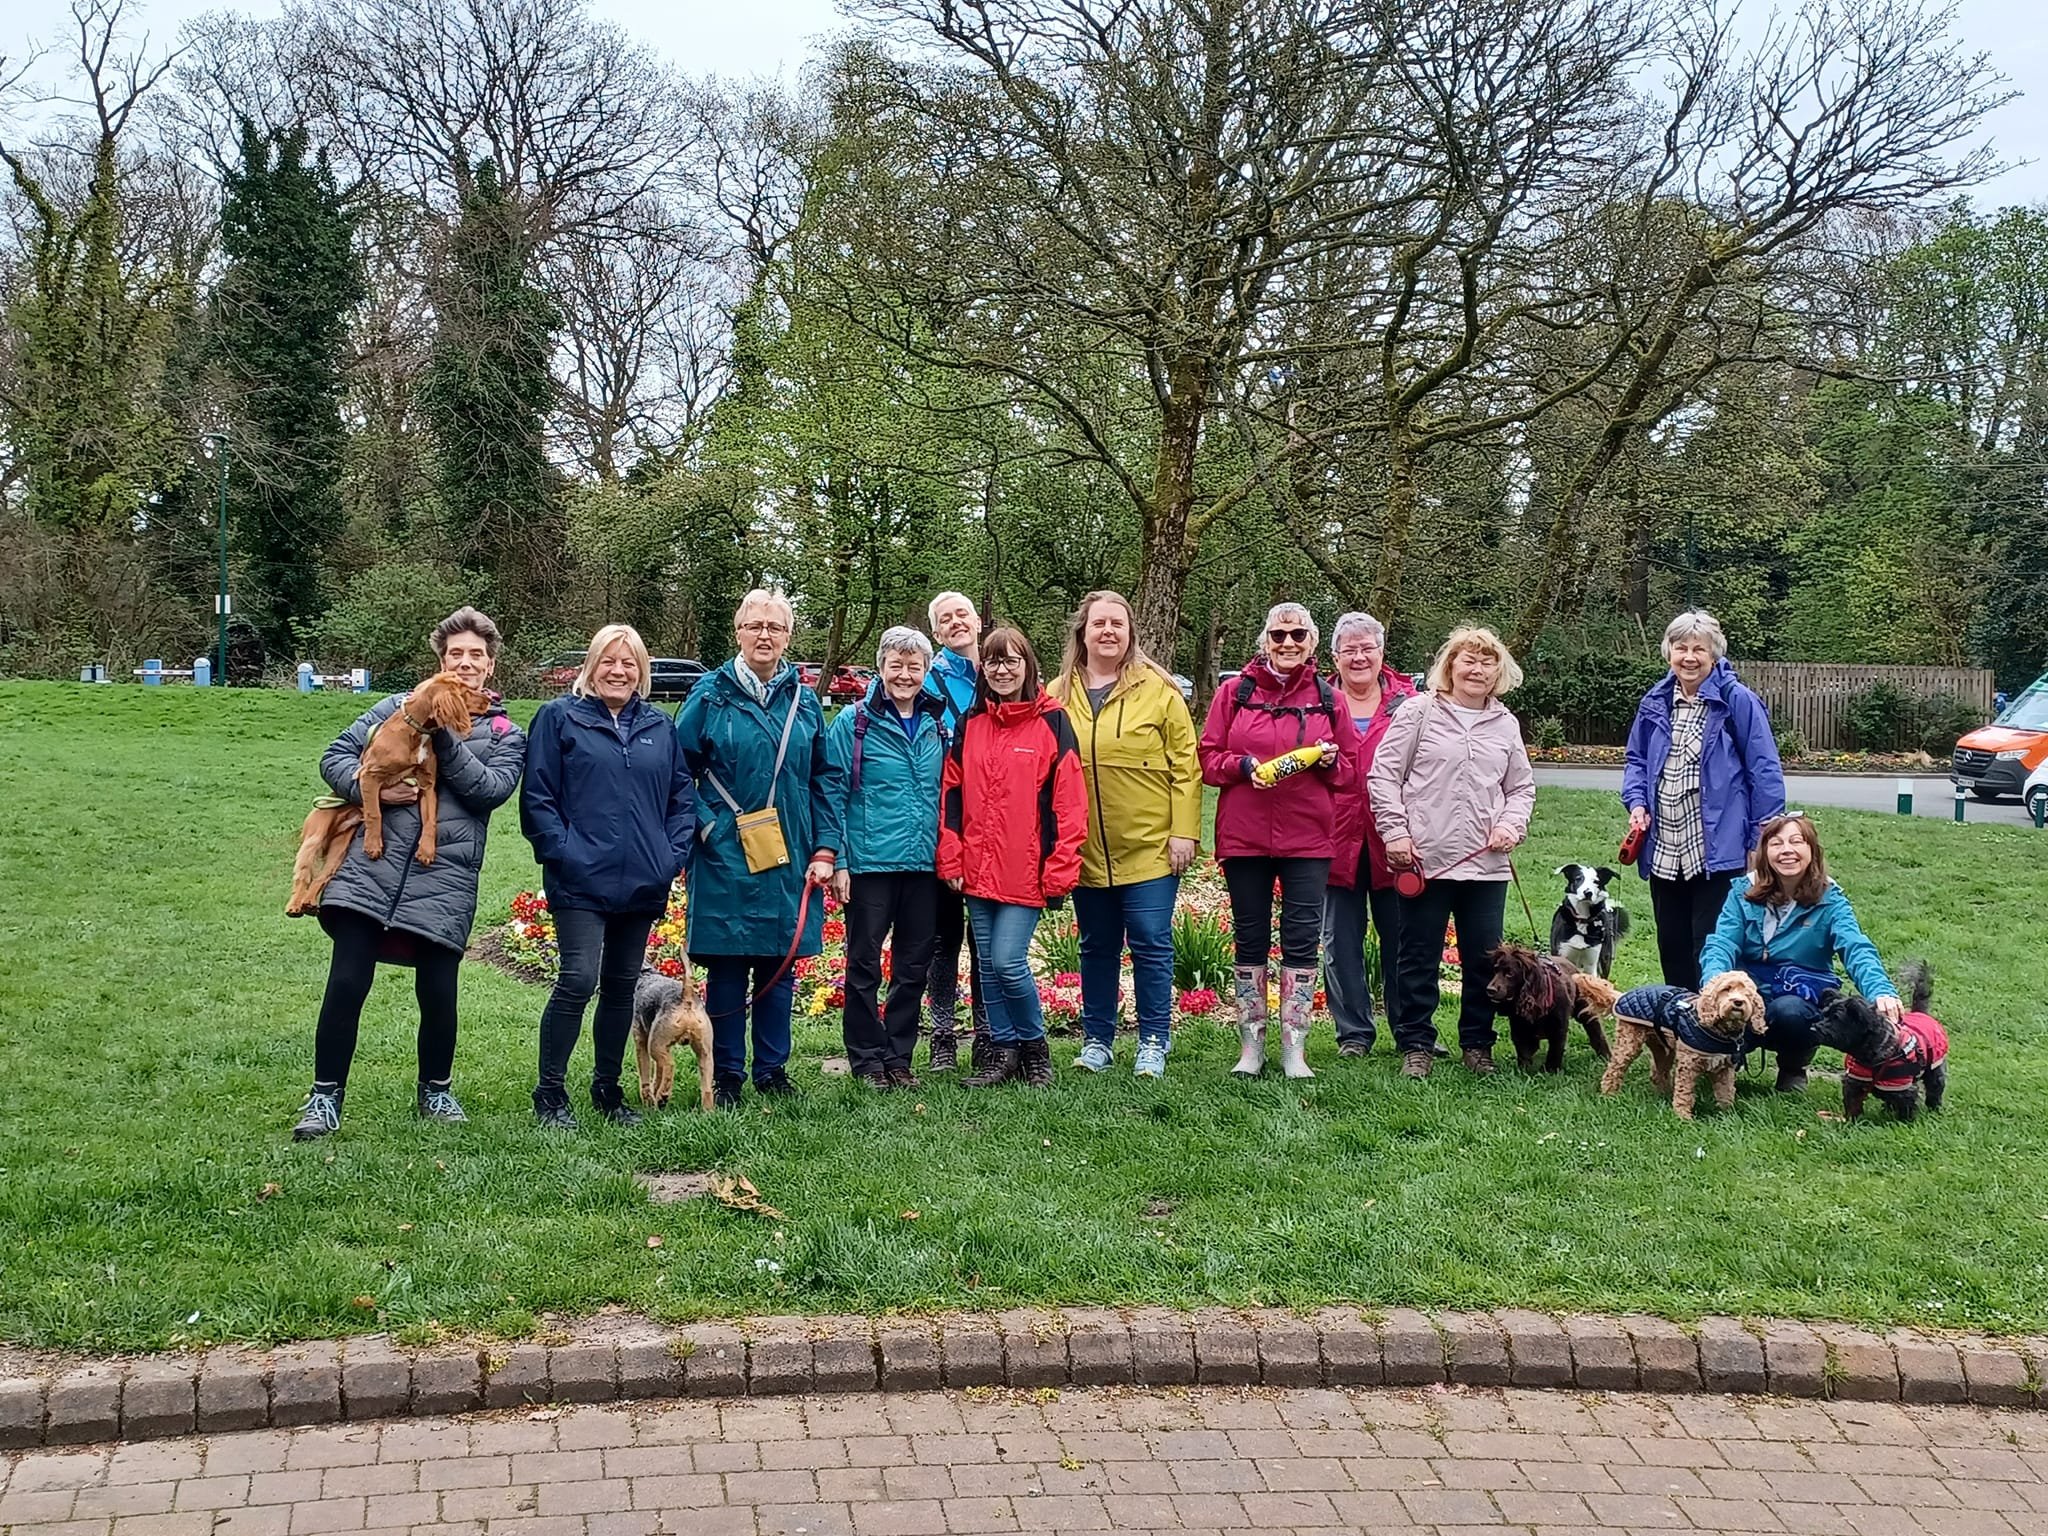 Happy Monday! 

Some of our choir members were out for a walk &amp; a cuppa on Saturday (repping the LV merch ofc!) during our break from choir. How lovely?! 🥰🤩

The build up &amp; prep for our new term begins today with lotttssss of plans in the w